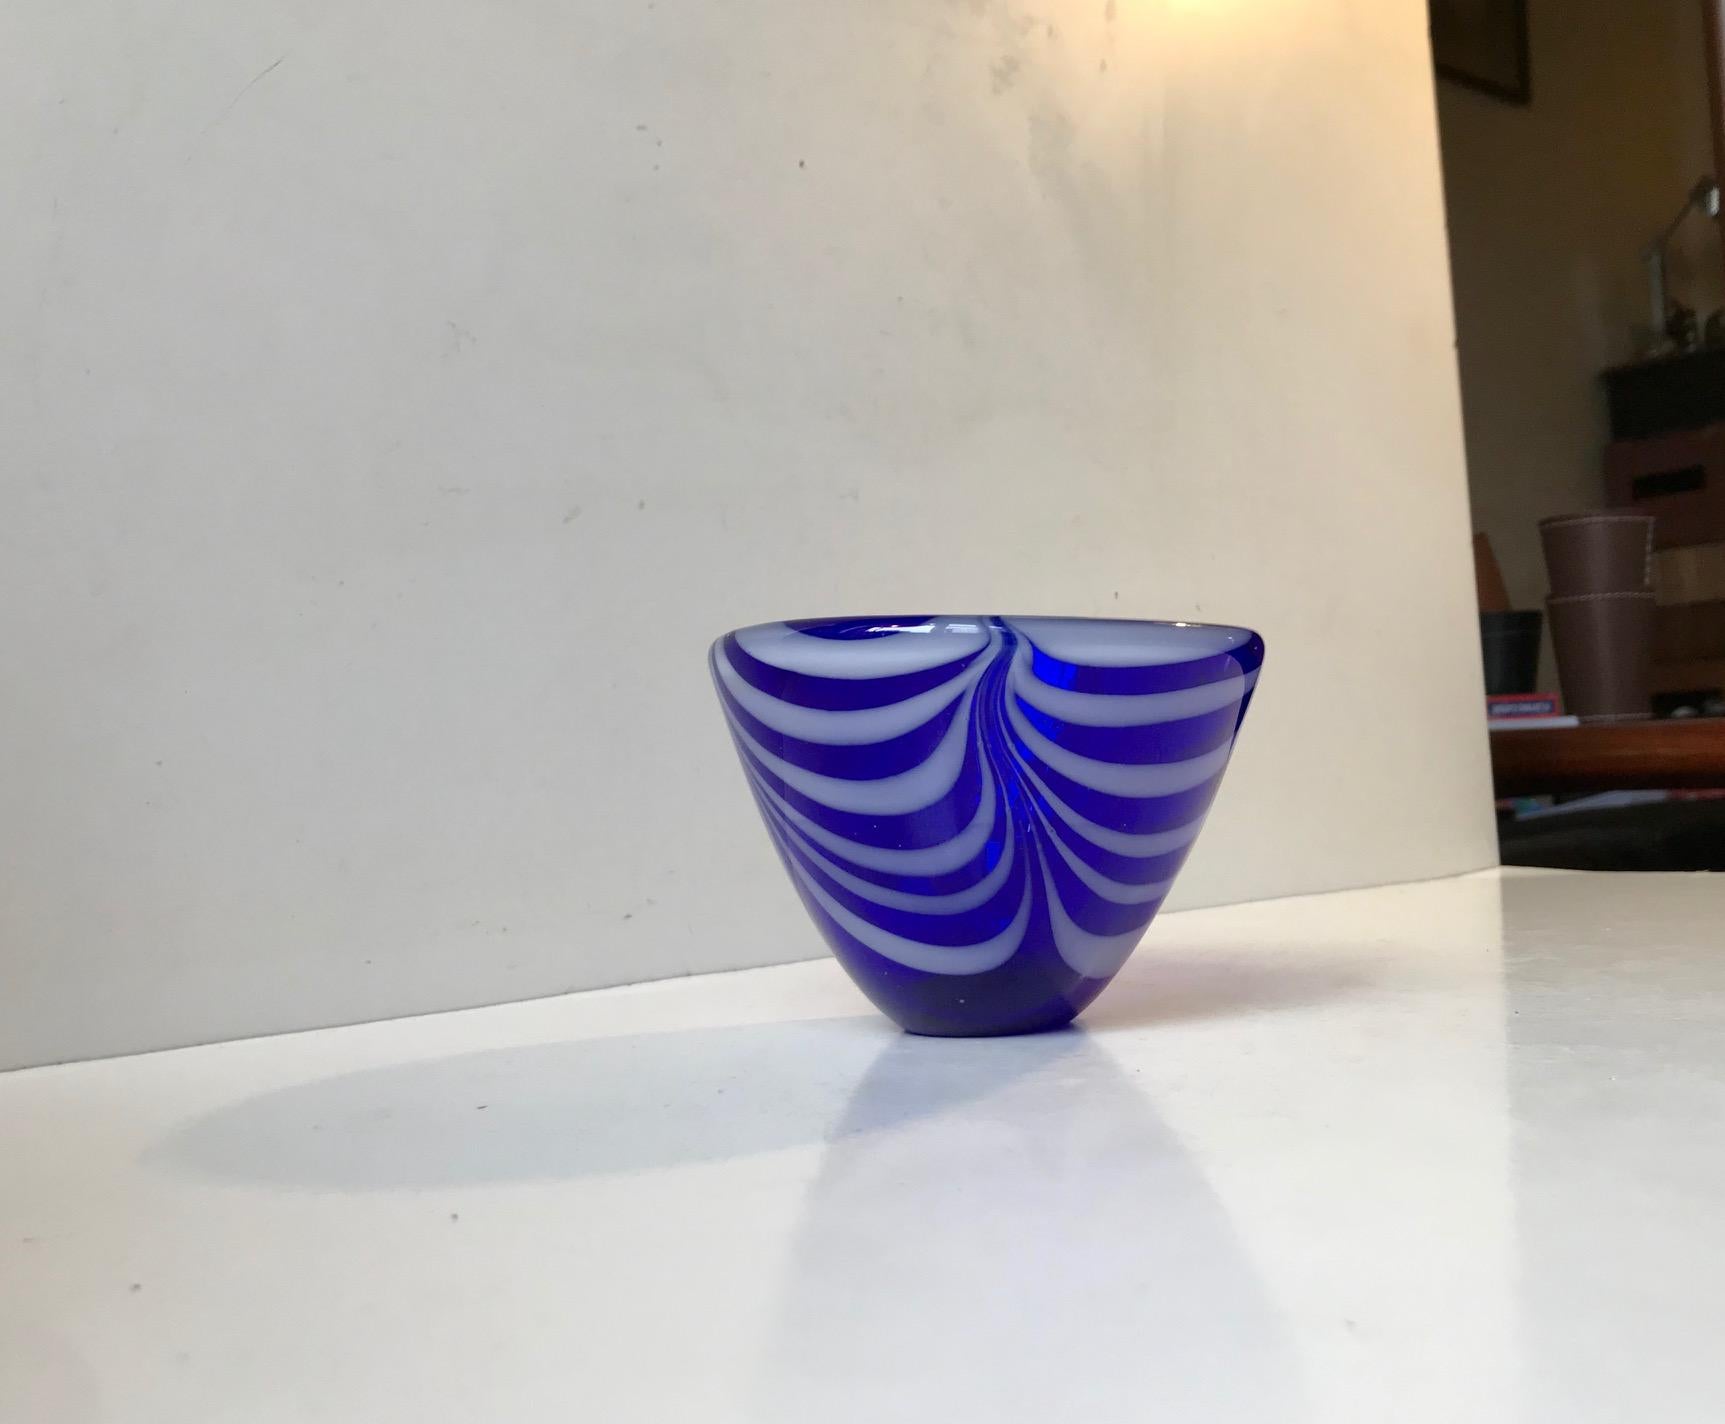 Thick hand blown cobalt blue conical glass bowl with white spiral/swirl decor og opaque glass. Manufactured by Kosta Boda and designed by Vicke Lindstrand in Sweden during the 1960s.